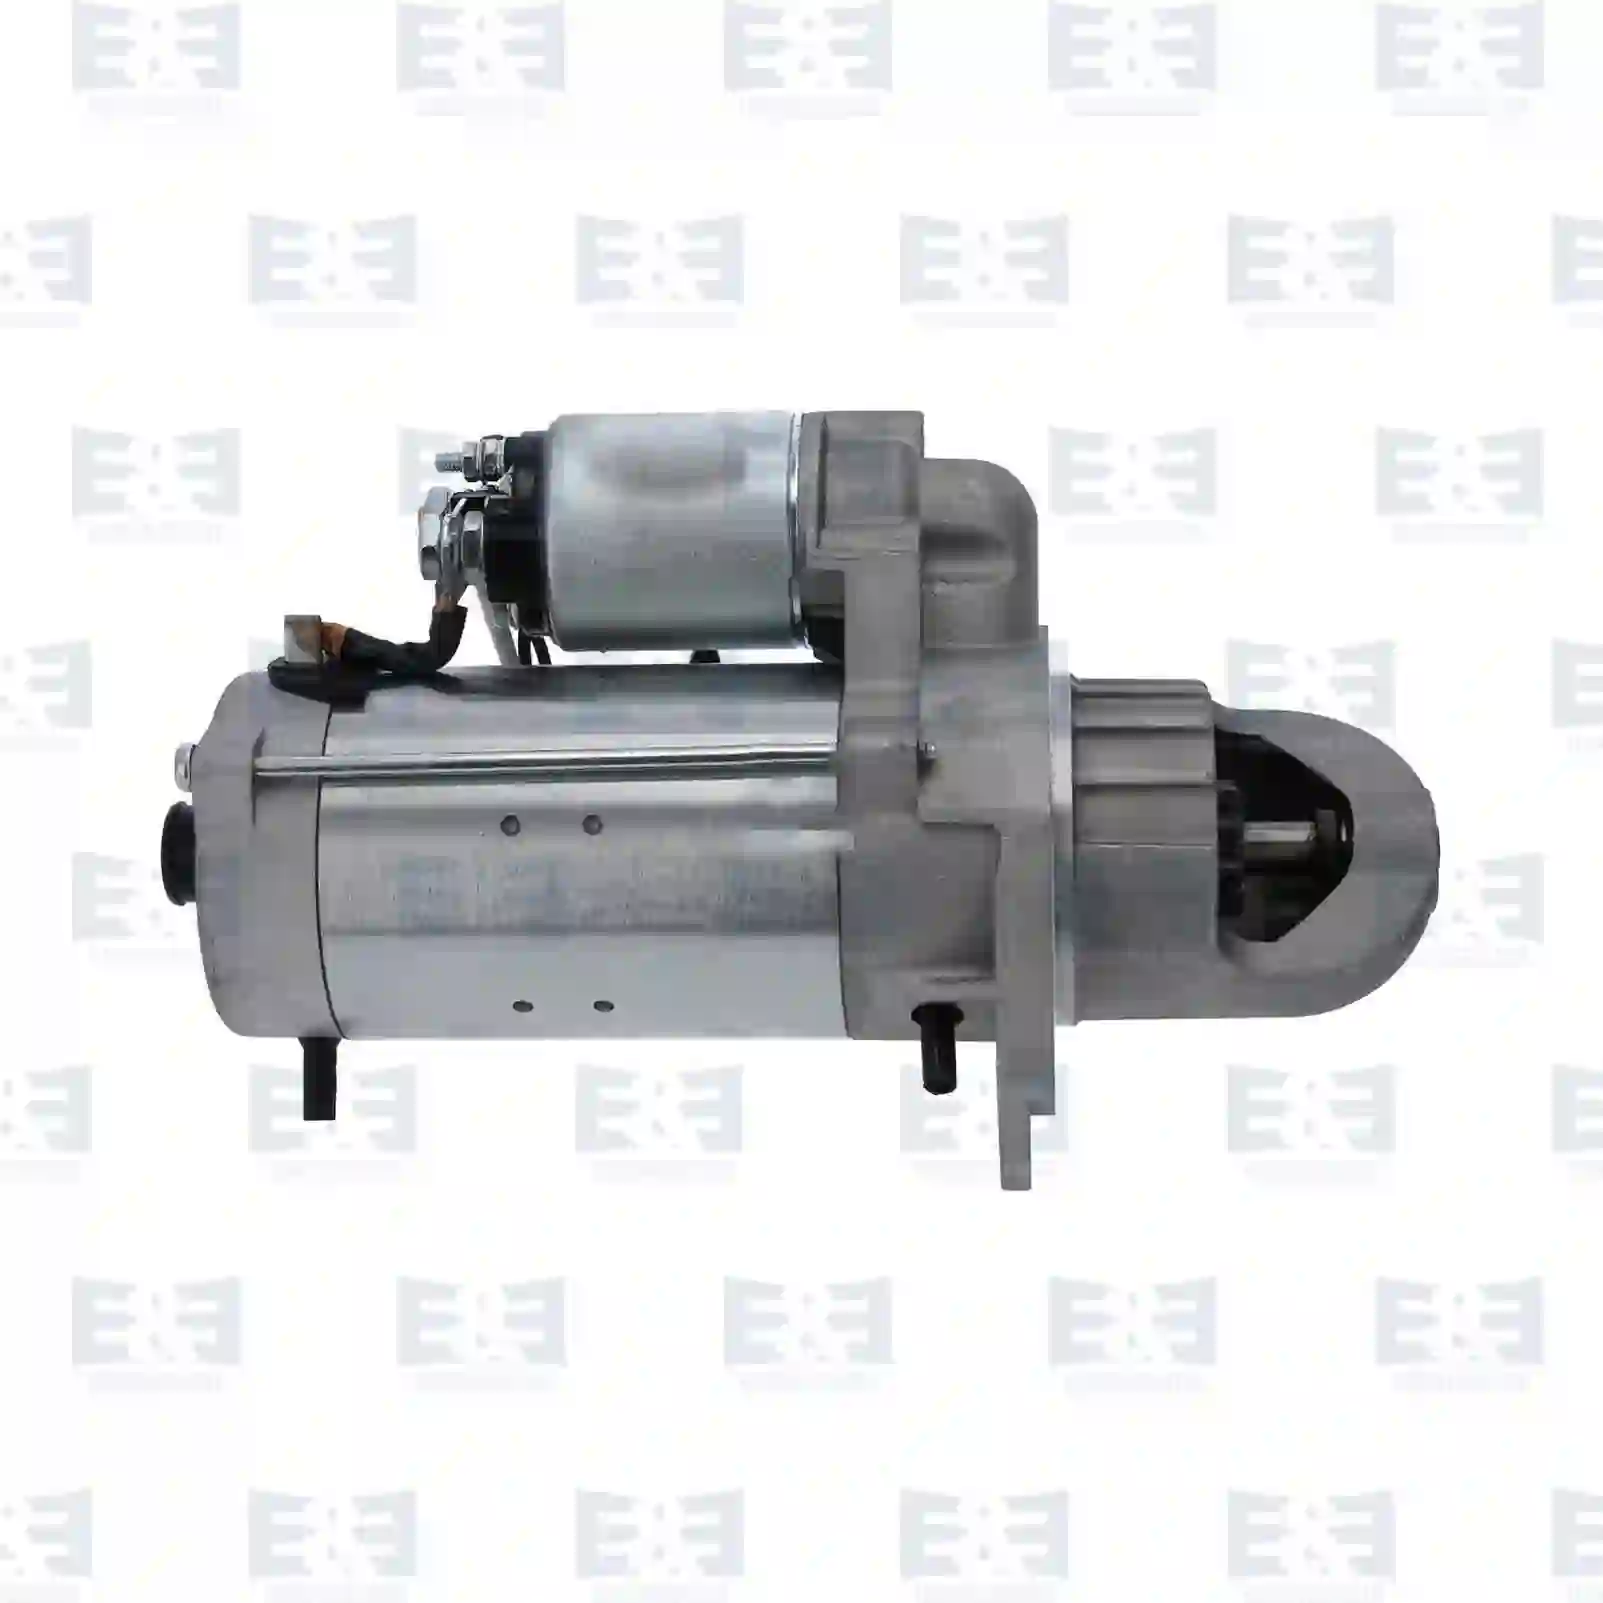 Starter Motor Starter, EE No 2E2290933 ,  oem no:1516660, 1516660A, 1516660R, 571570808, 36262016003, N1015000043, 0051512001, 0051512201, 0005159701, 0011516701, 0041418101, 0041516201, 0041518401, 004151840180, 0051512001, 005151200180, 0051512101, 0051512201, 0051517601, 0051519701, 0061512101, 0061512201, 006151220180, 0061512203, 0061516701, 0071513401, SE3000022, ZG20941-0008 E&E Truck Spare Parts | Truck Spare Parts, Auotomotive Spare Parts